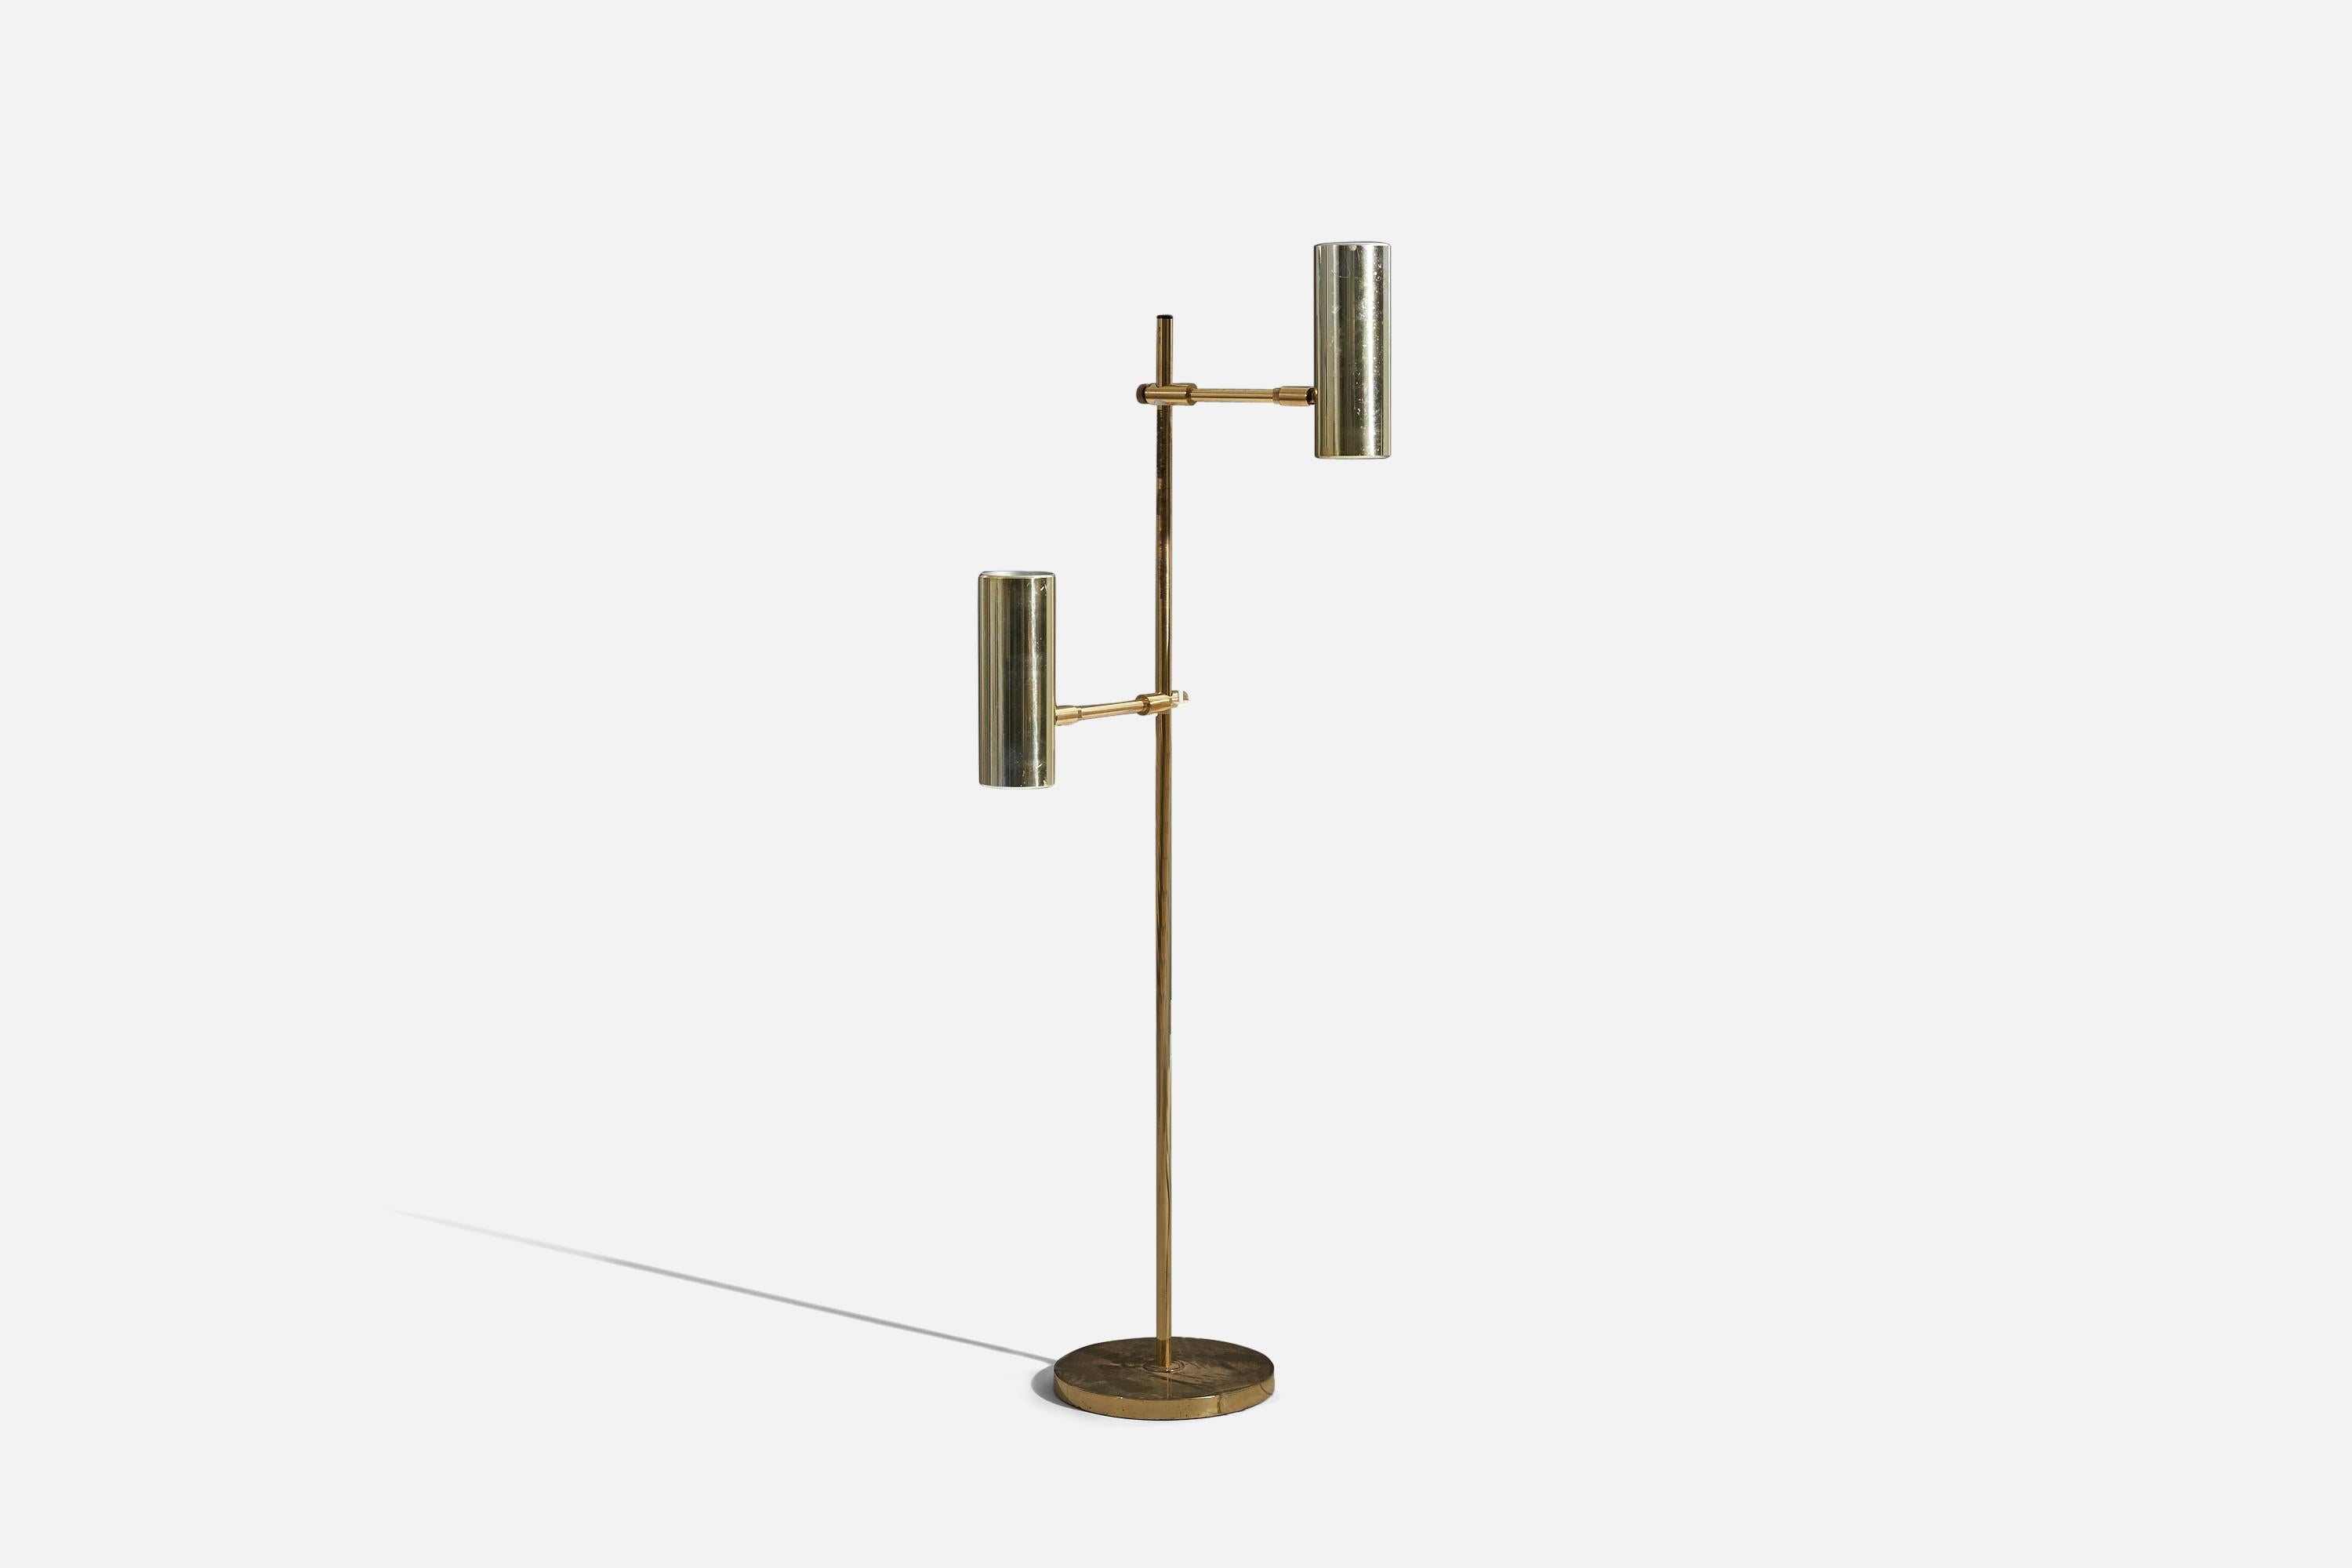 A brass, adjustable floor lamp designed and produced by Bergboms, Sweden, c. 1970s.

Variable dimensions, measured as illustrated in the first image.